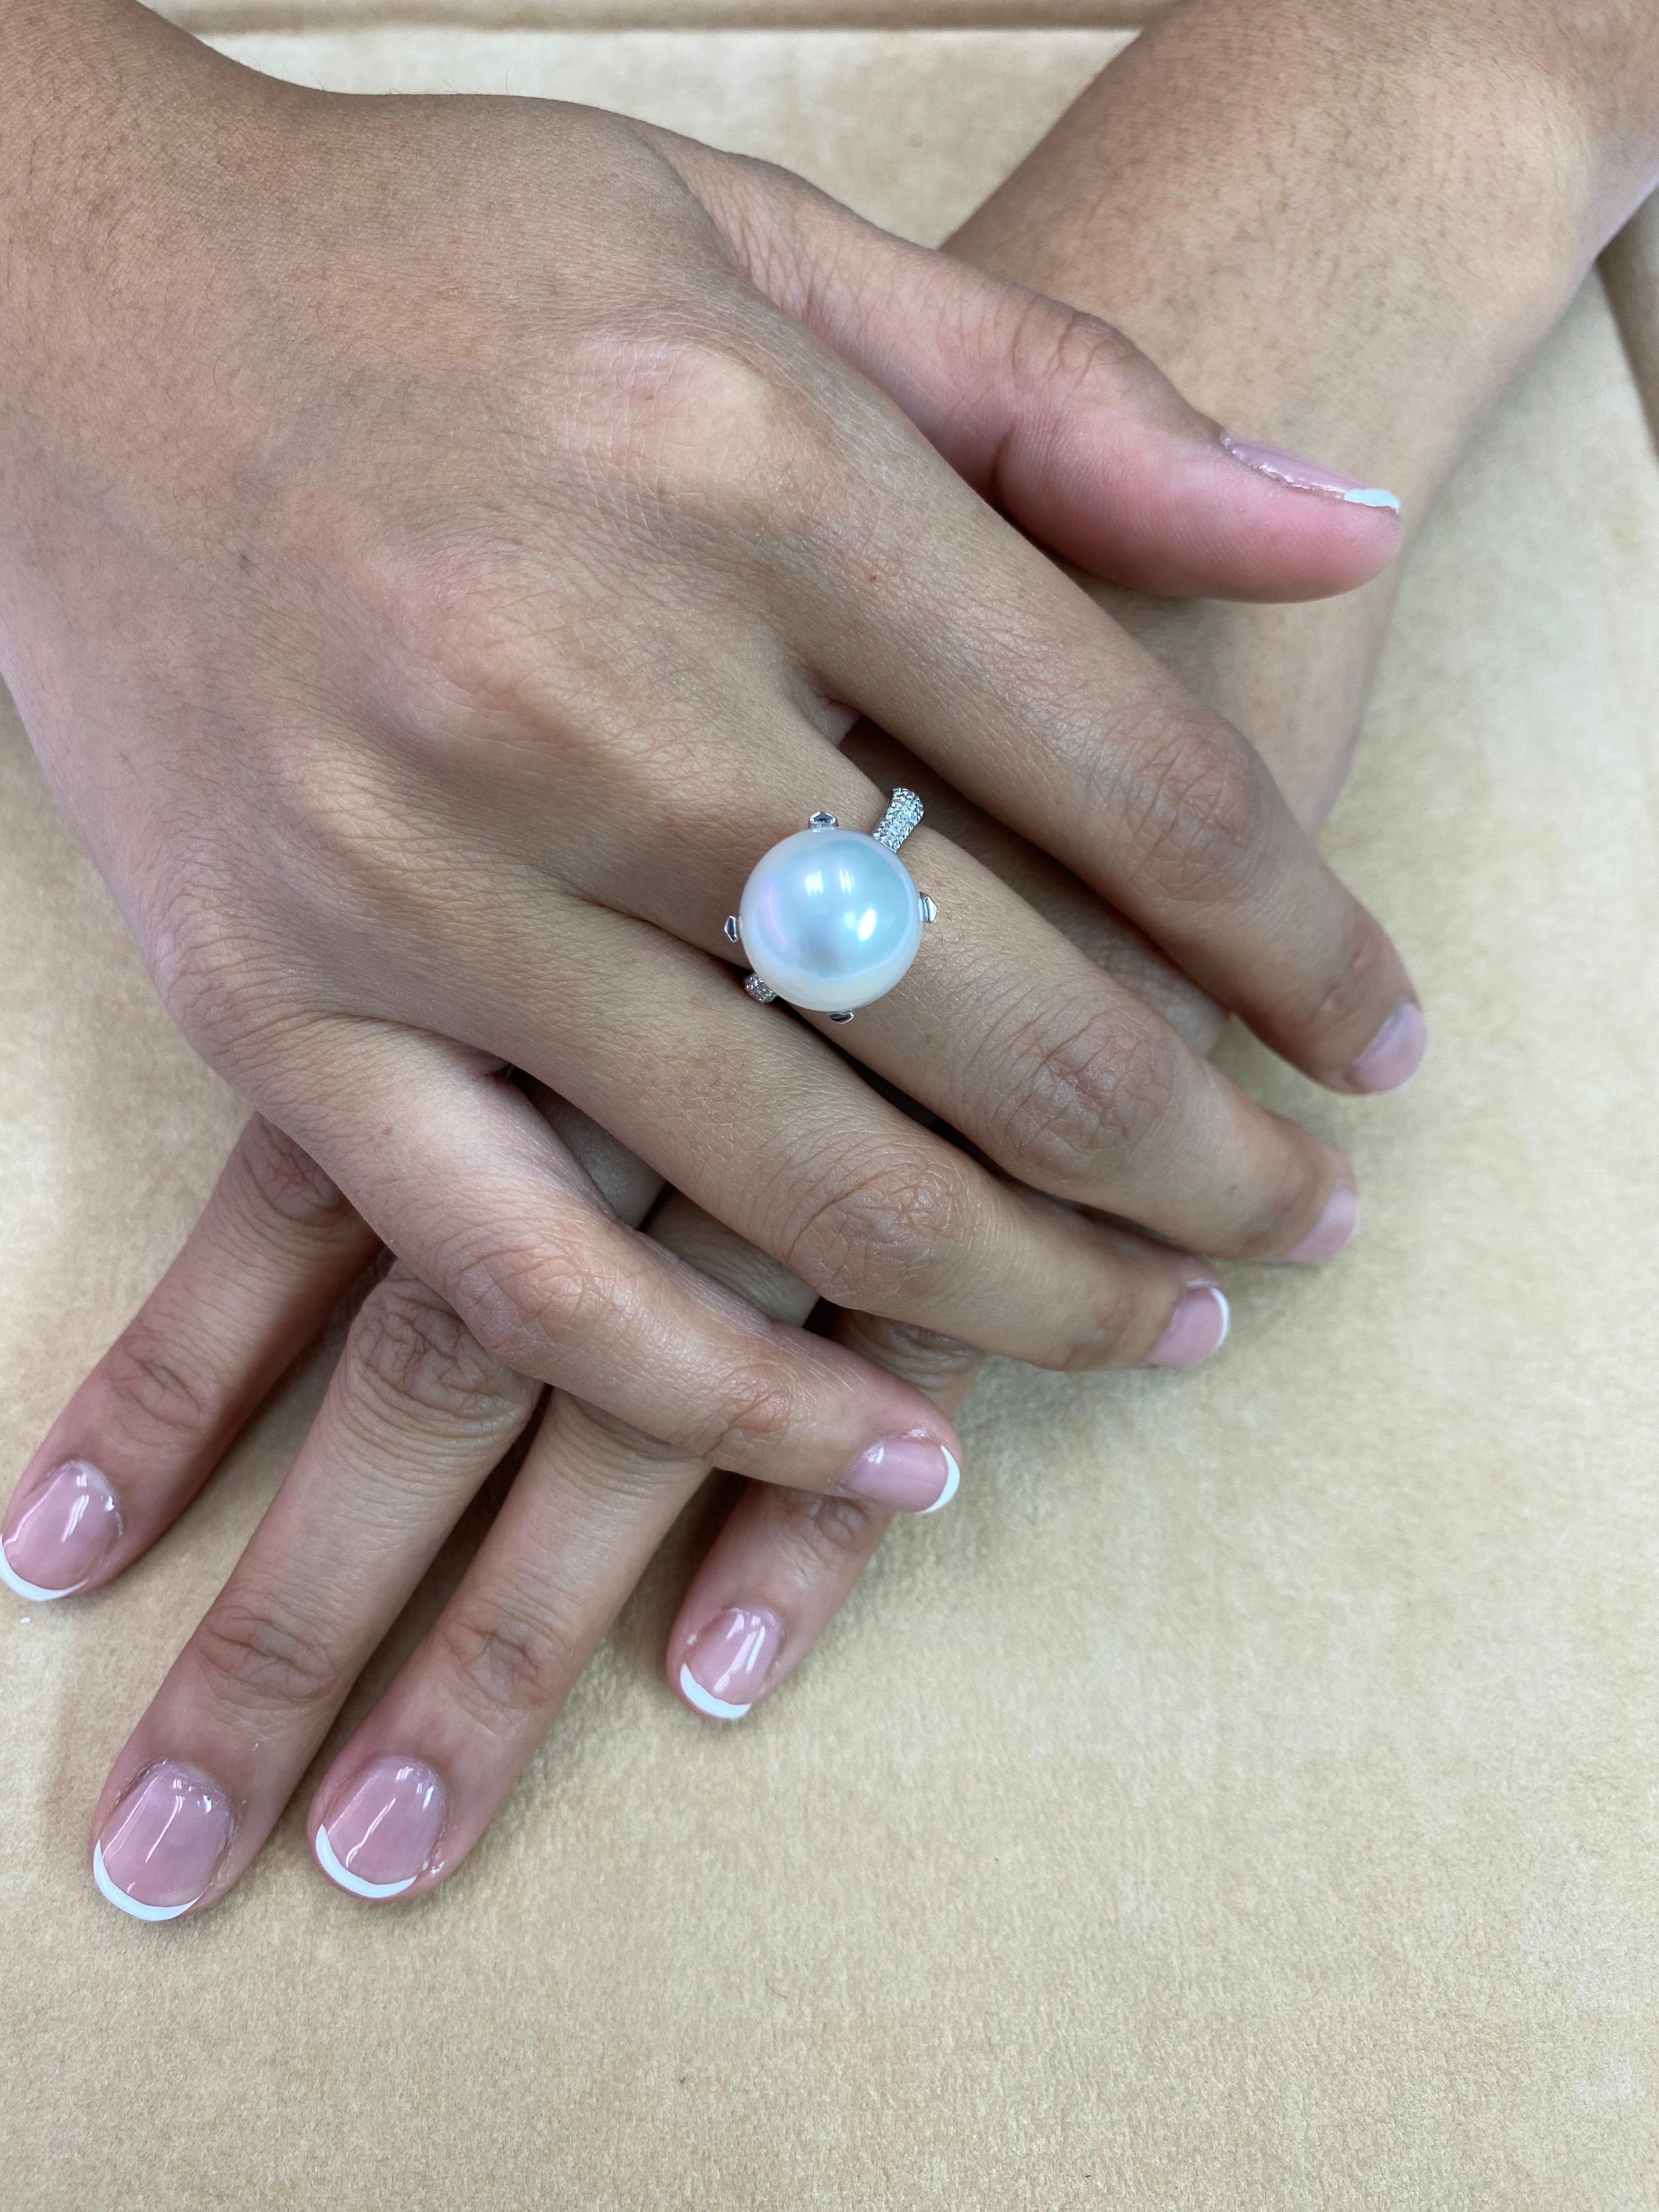 This is a certified South Sea culture pearl. The center pearl is 13.1mm. This high quality pearl is round, has beautiful skin and high luster. The color grading is silver white. The ring is set in 18k white gold. There are 0.28Cts of small diamonds